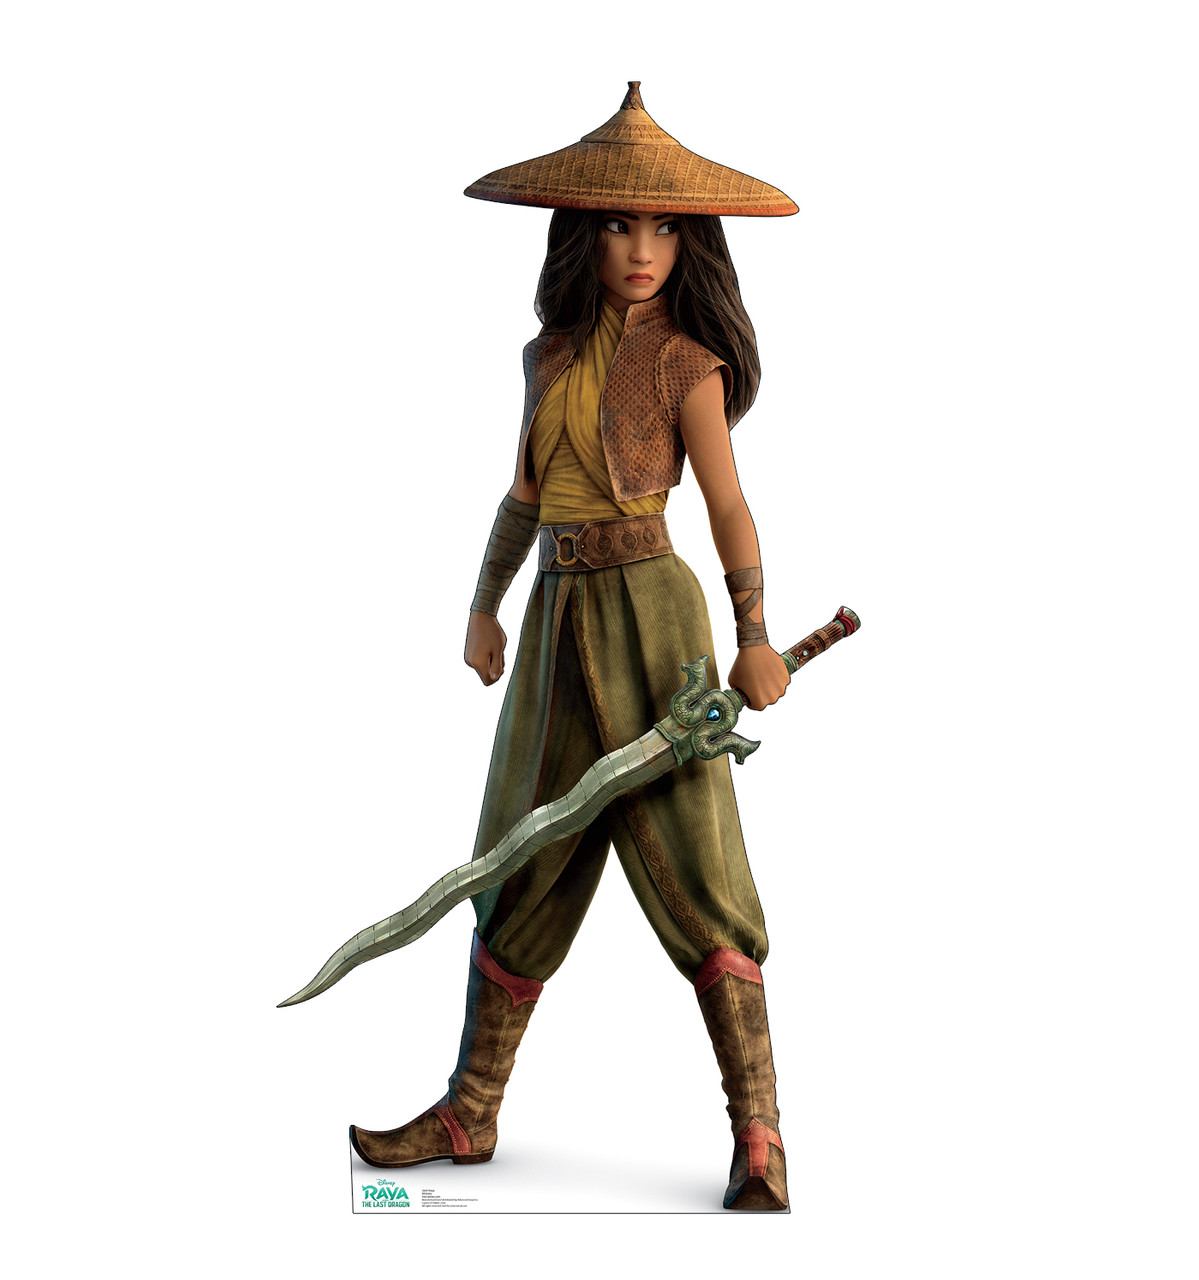 Lifes-size cardboard standee of Raya from Disney's Raya and the Last Dragon.